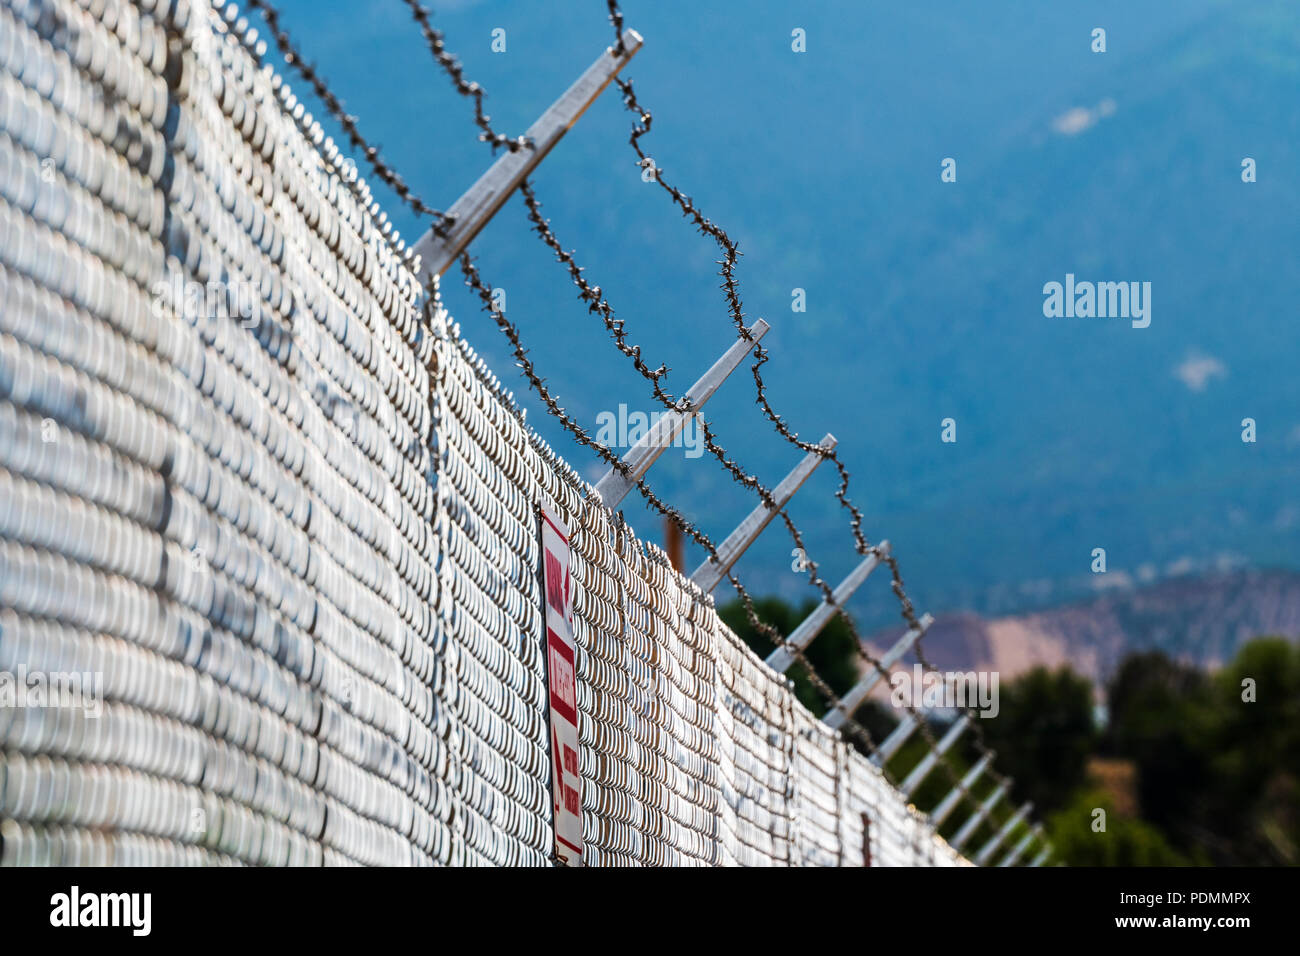 Cyclone fence & barbed wire; industrial site; Smeltertown, near   Salida; Colorado; USA Stock Photo